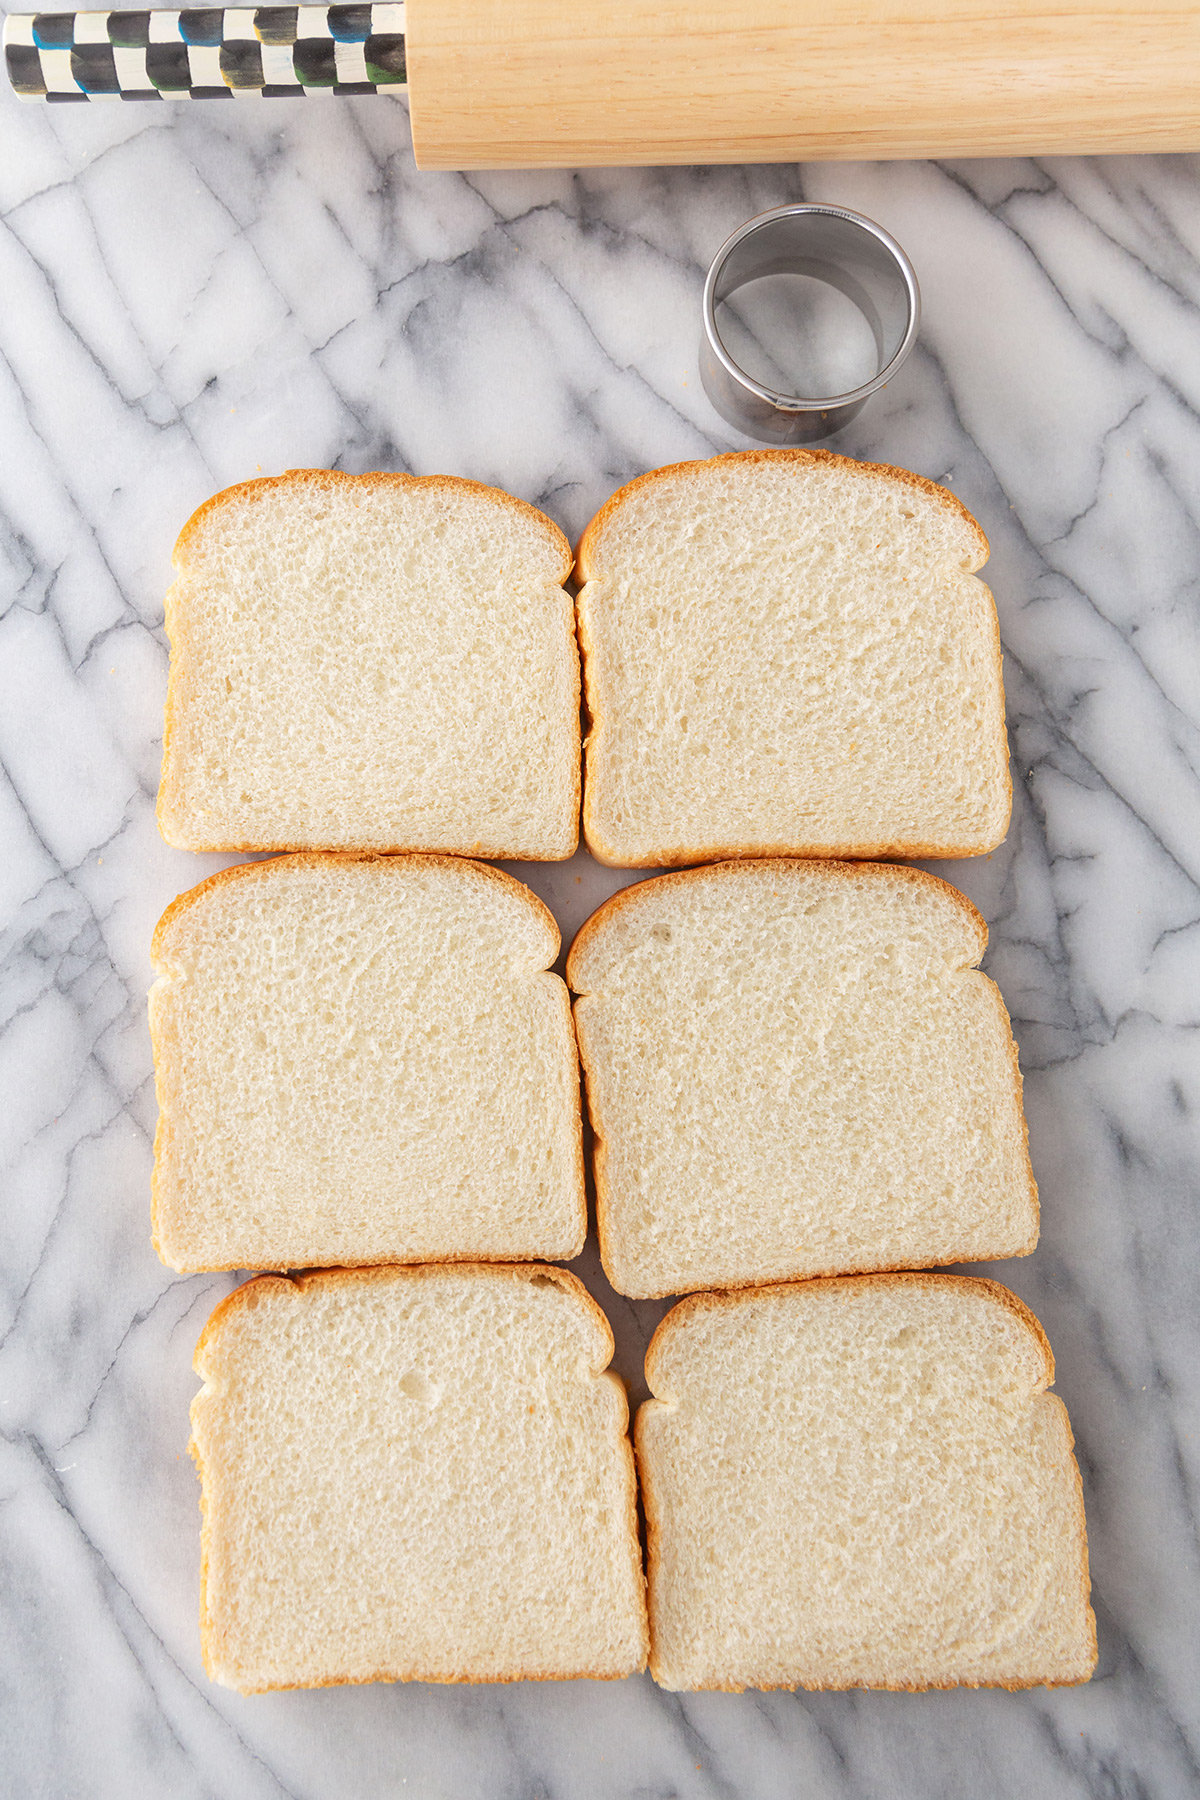 Sandwich Bread on Marble Counter